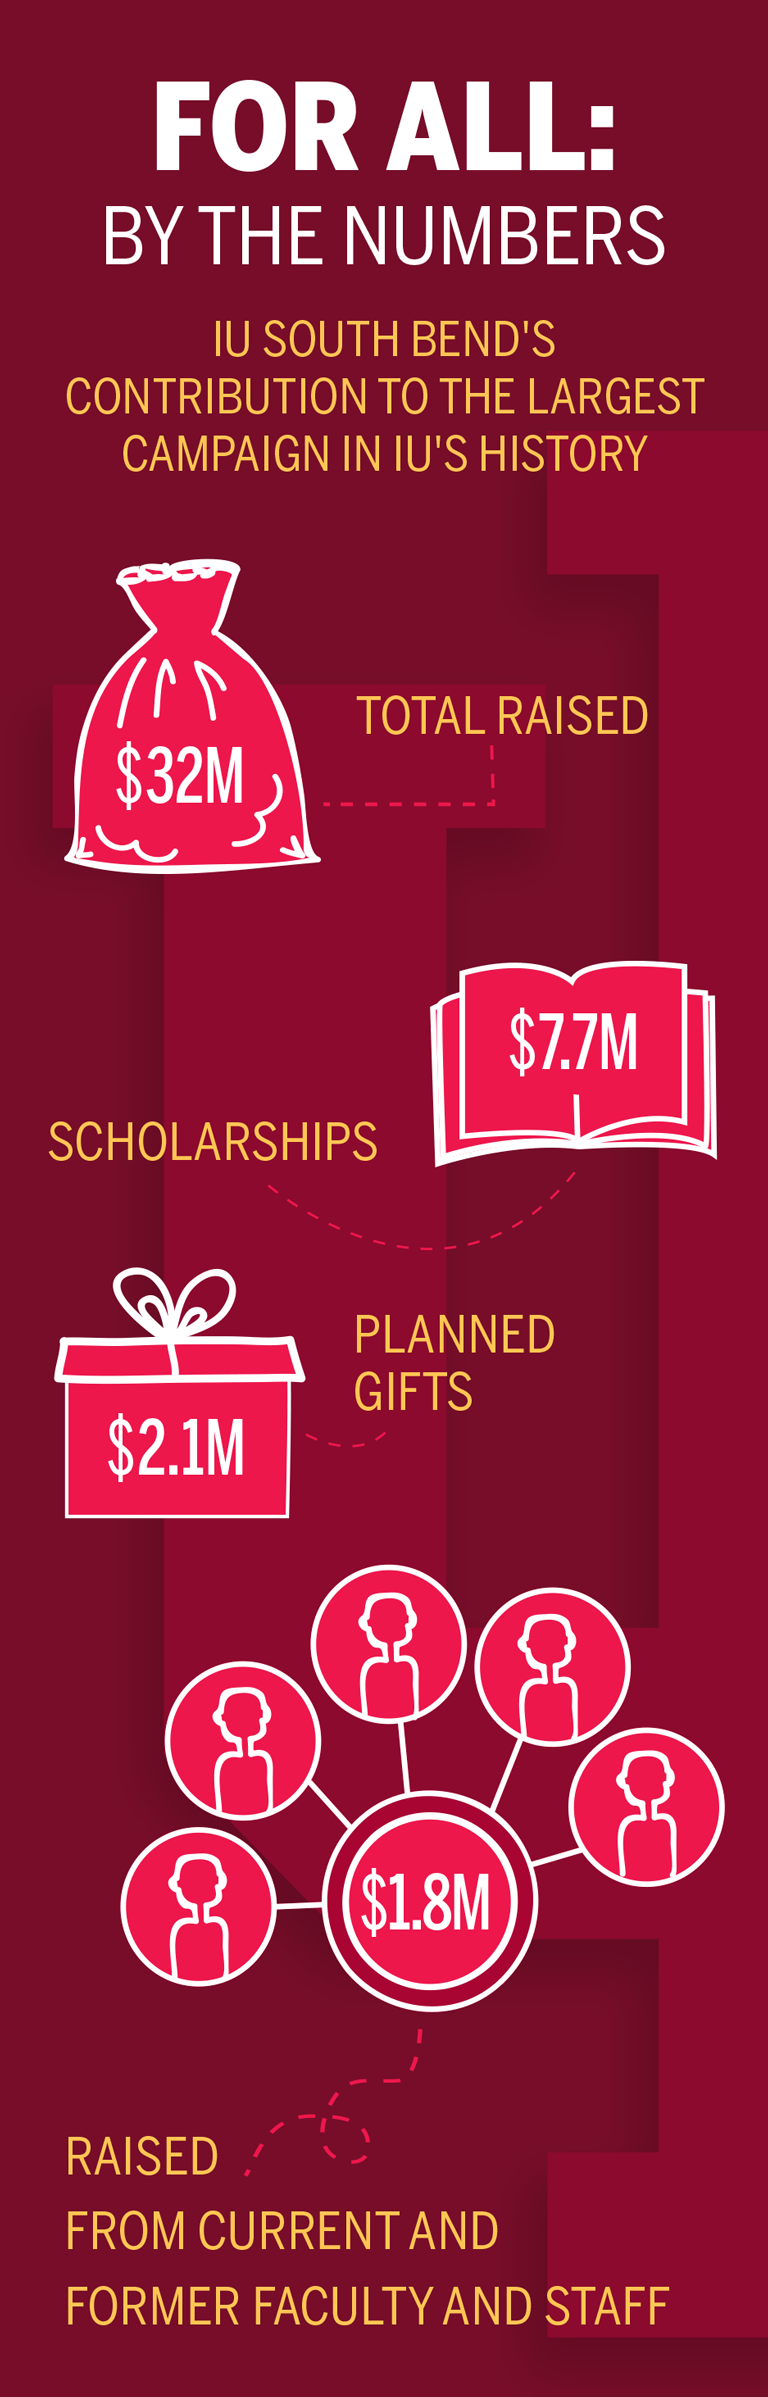 For all by the numbers. IU South Bend's contribution to the largest campaign in IU's history. TOTAL RAISED $32 million. Scholarships $7.7 million. Planned gifts $2.1 million. Raised from current and former faculty and staff $1.8 million.